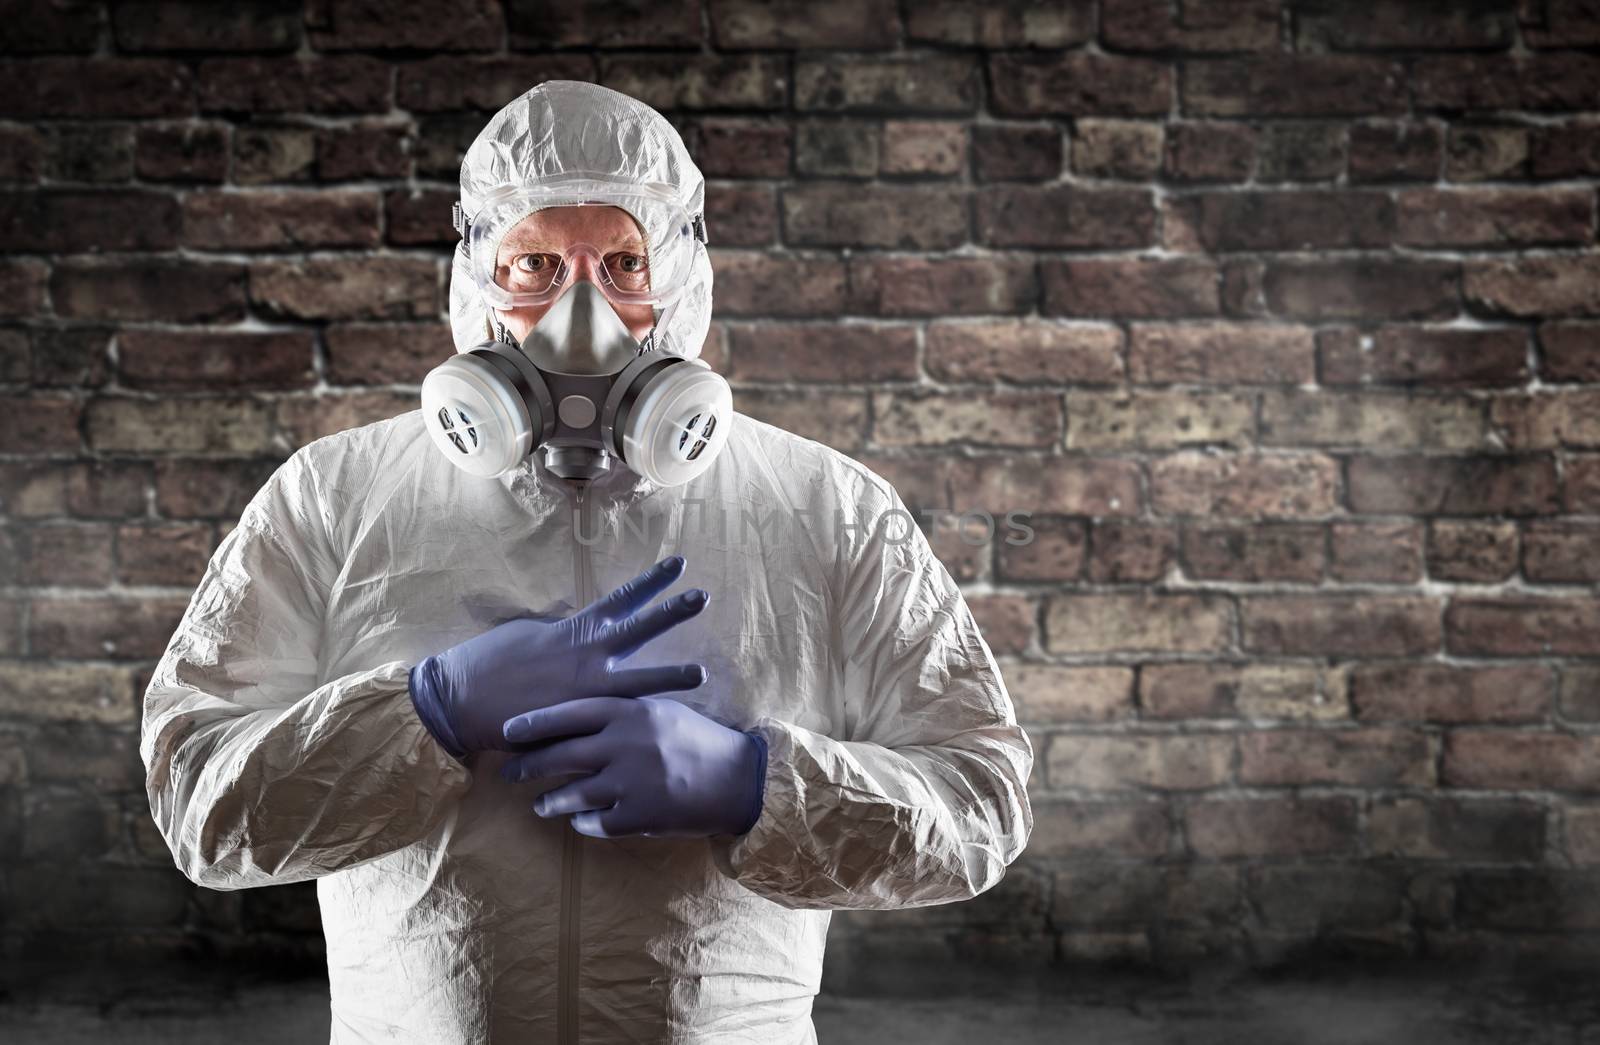 Man Wearing Hazmat Suit, Protective Gas Mask and Goggles Against Brick Wall by Feverpitched